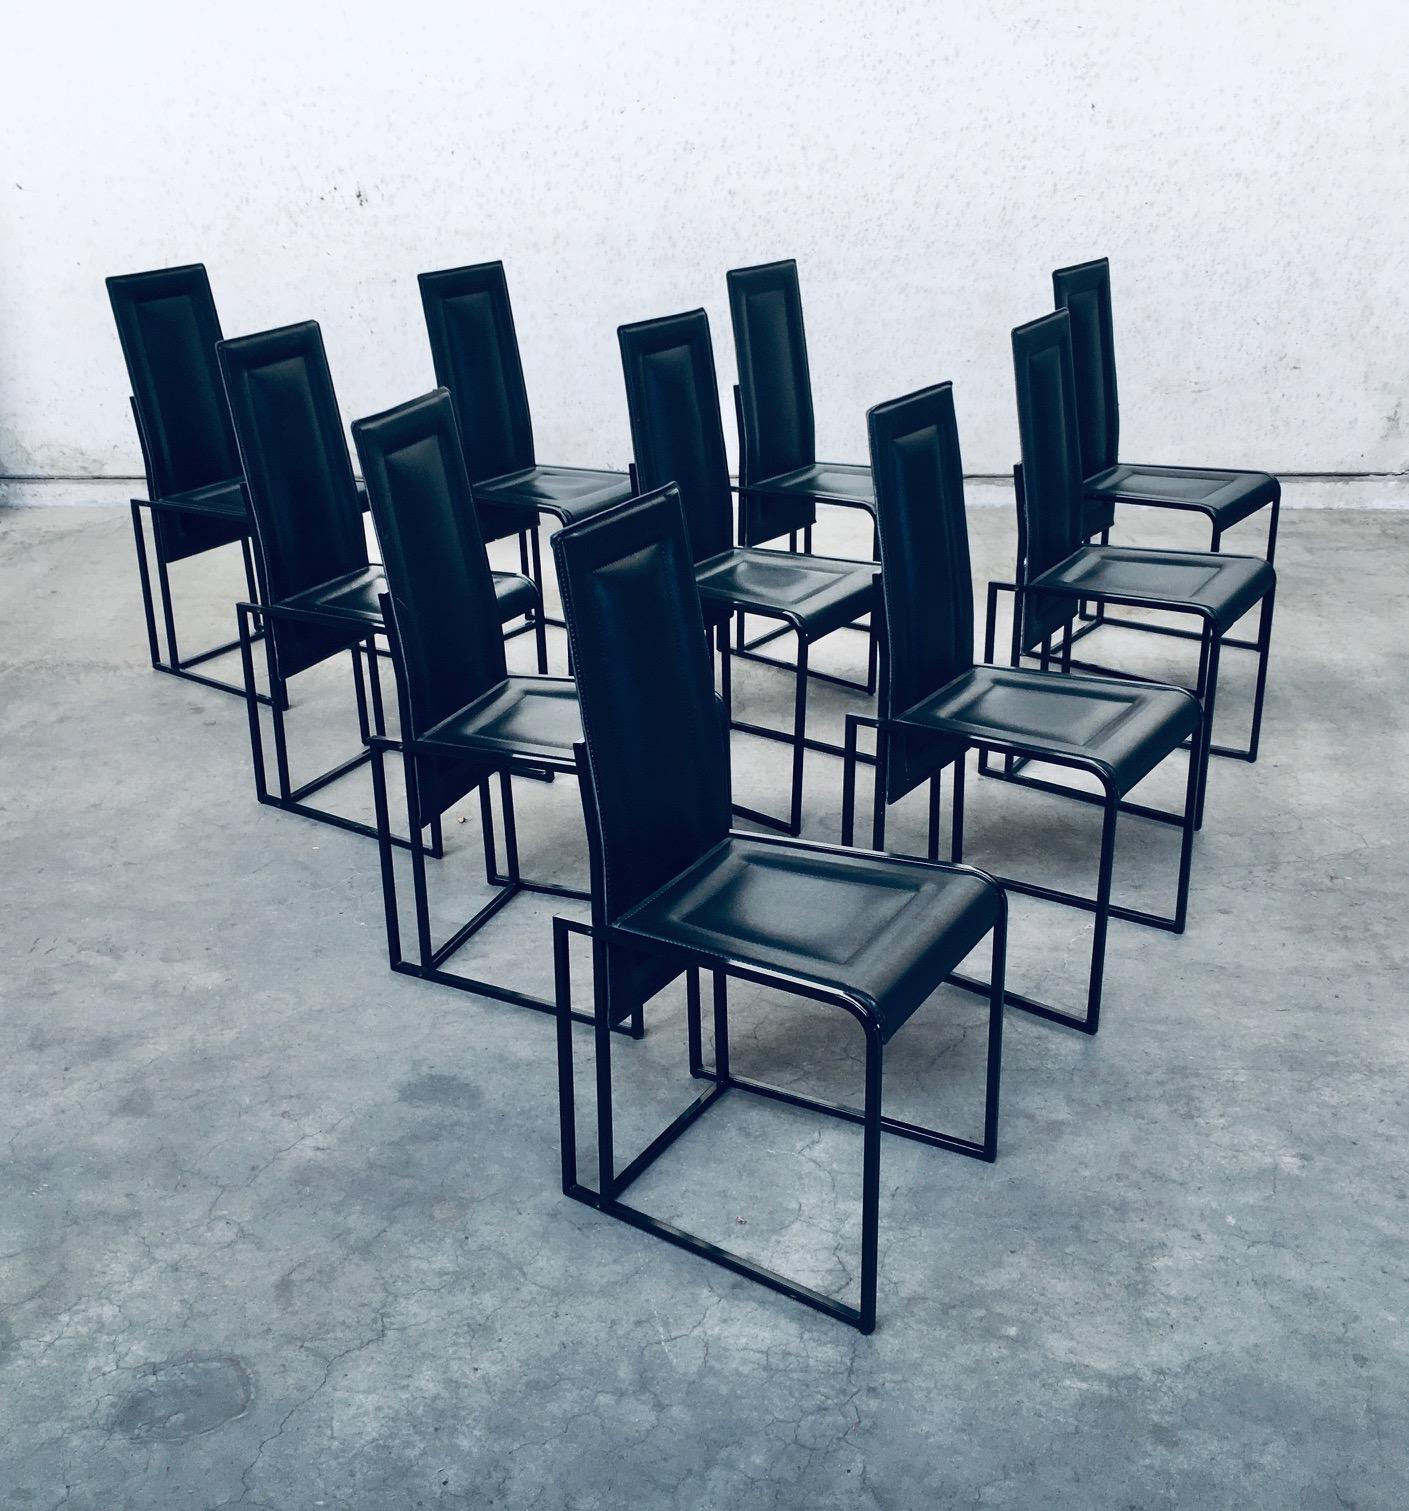 Vintage Postmodern Modern Architectural design set of 10 dining chairs, made in Italy 1980's. Black leather seat and back rest on black laquered metal architectural square open frame shaped base. Padding on the back rest and on the seat in the